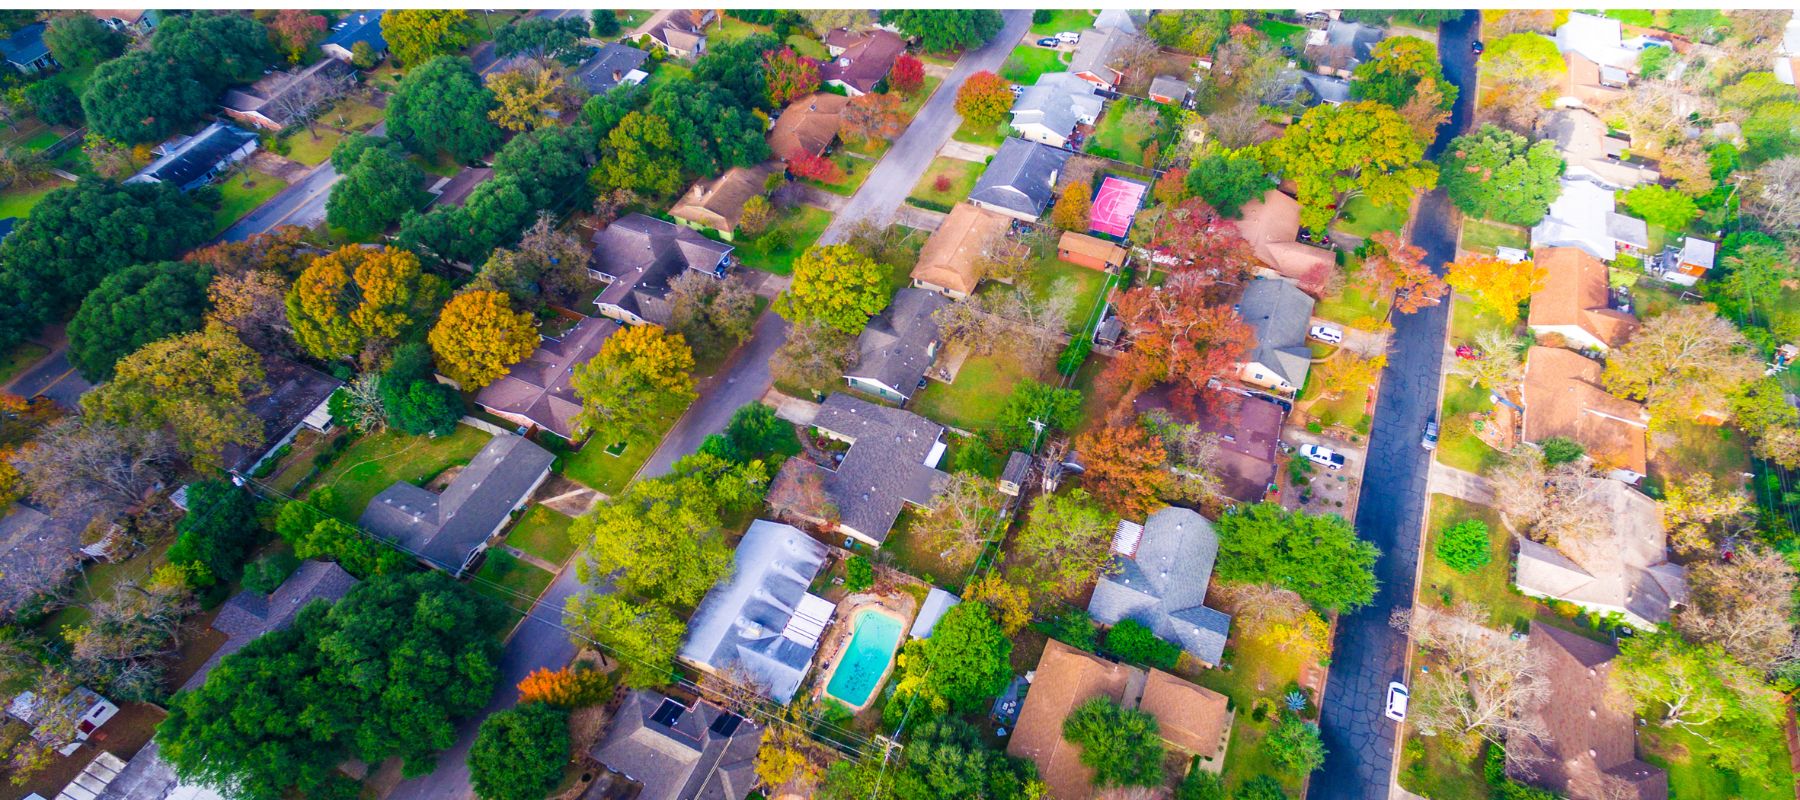 An aerial view of a suburban neighborhood showcasing an array of detached houses, each with distinct yard spaces, some featuring swimming pools. The area is interspersed with lush trees in various shades of green, orange, and yellow, suggesting a vibrant autumn season. The layout reveals a tranquil, well-spaced residential area, with roads gently curving through the landscape